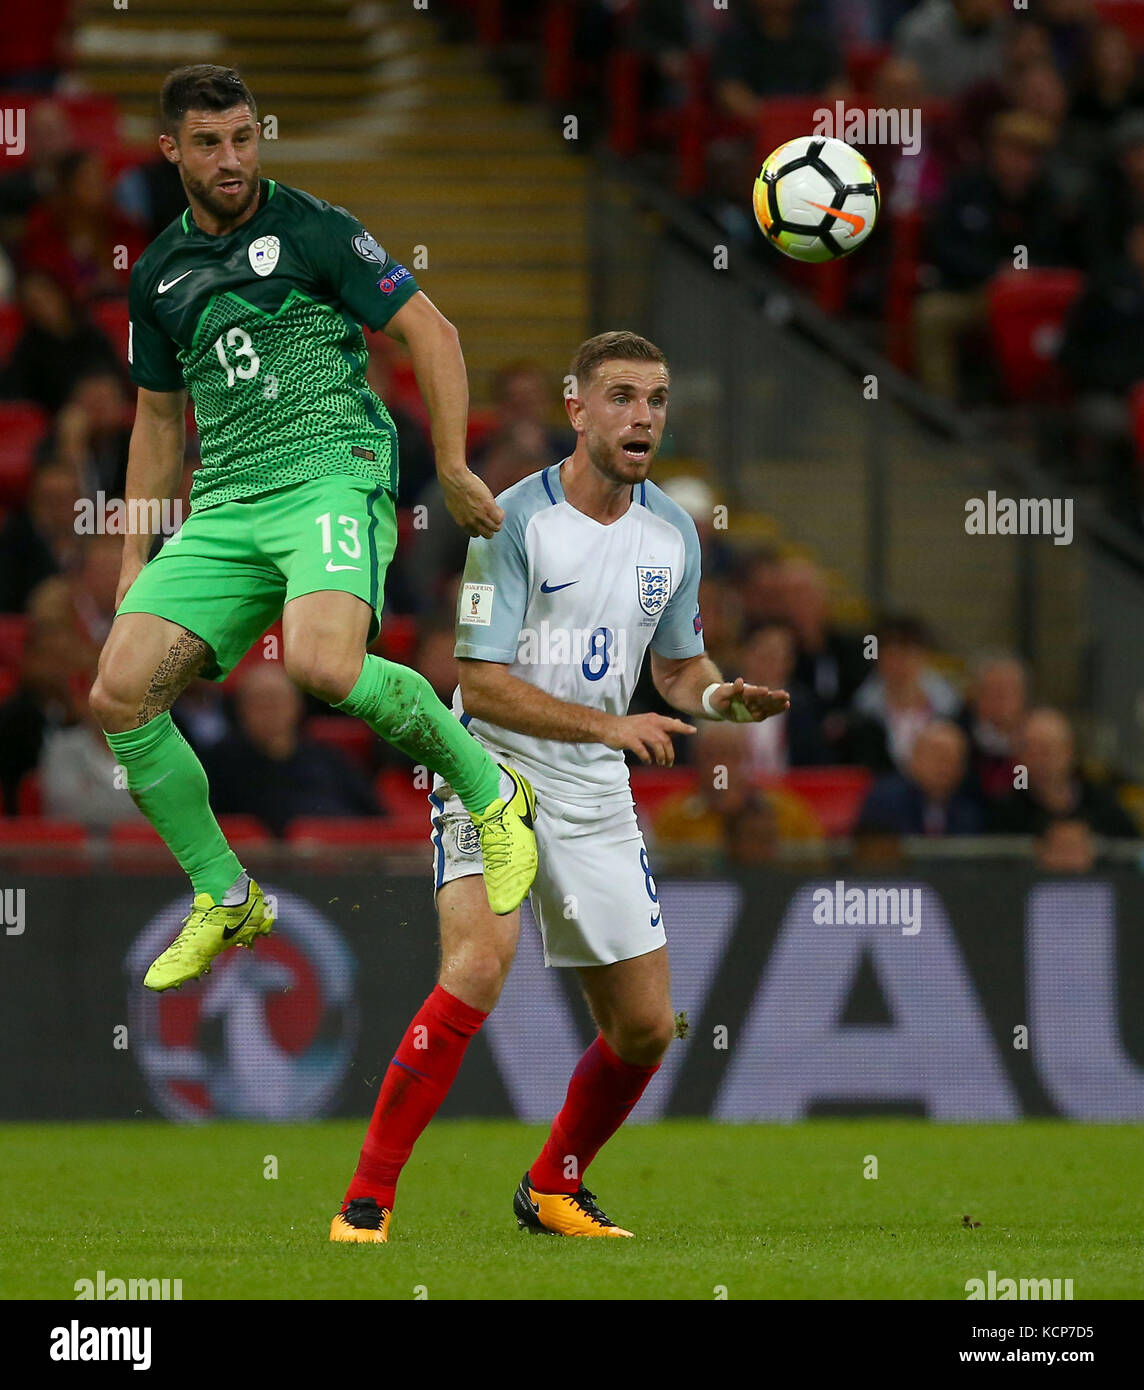 Bojan Jokic of Slovenia and Jordan Henderson of England during the FIFA World Cup Qualifier match between England and Slovenia at Wembley Stadium in London. 05 Oct 2017 Stock Photo